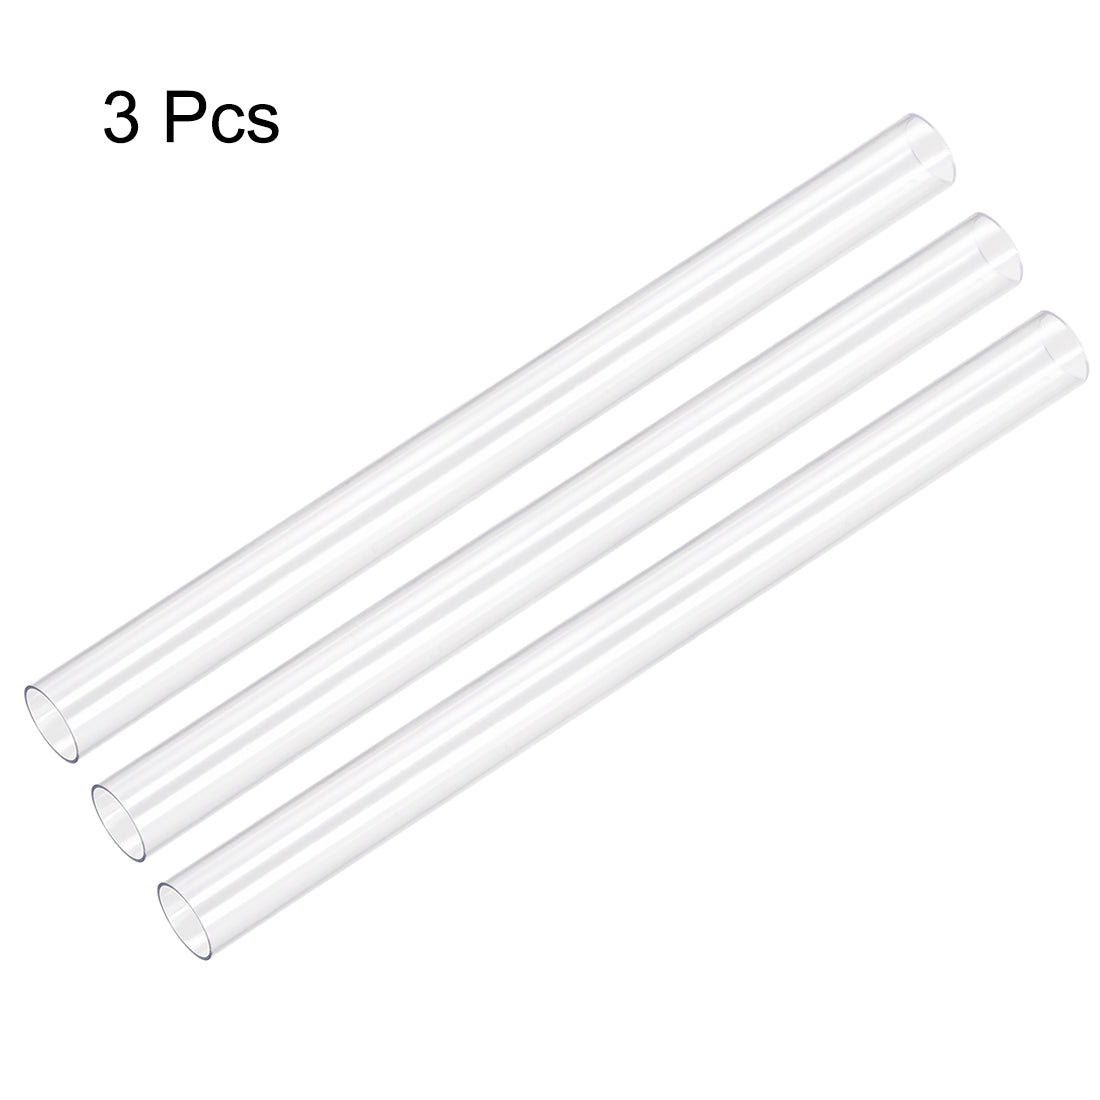 uxcell Uxcell PC Rigid Round Tubing Clear,18mm ID x 20mm OD, 0.5M/1.64Ft Length 3pcs